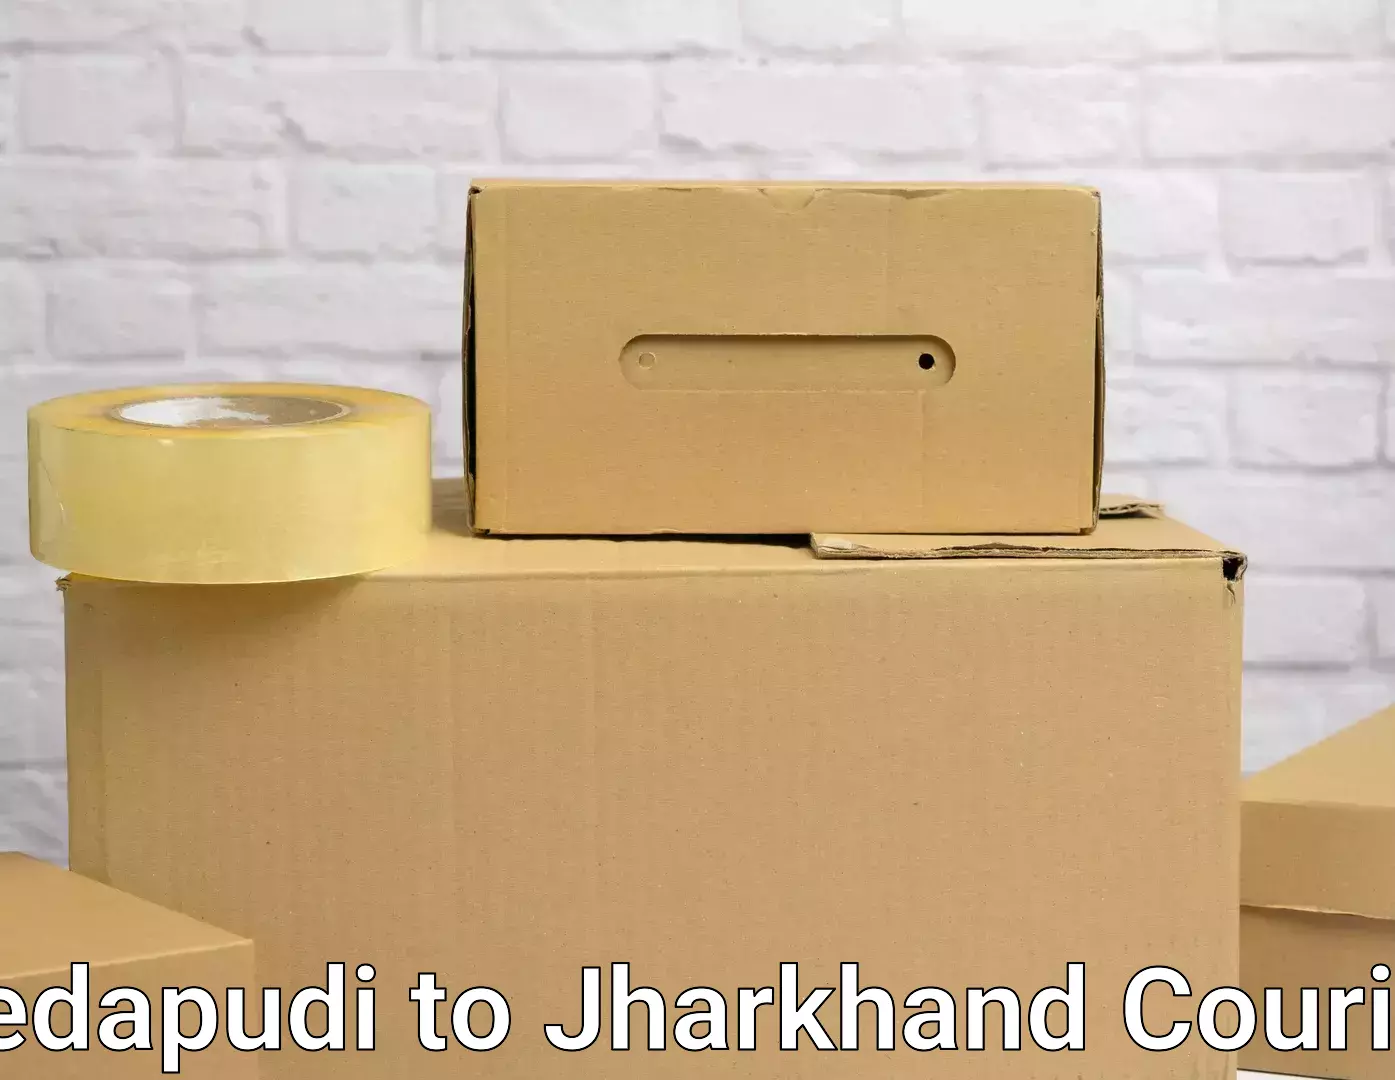 Professional moving assistance Pedapudi to Satbarwa